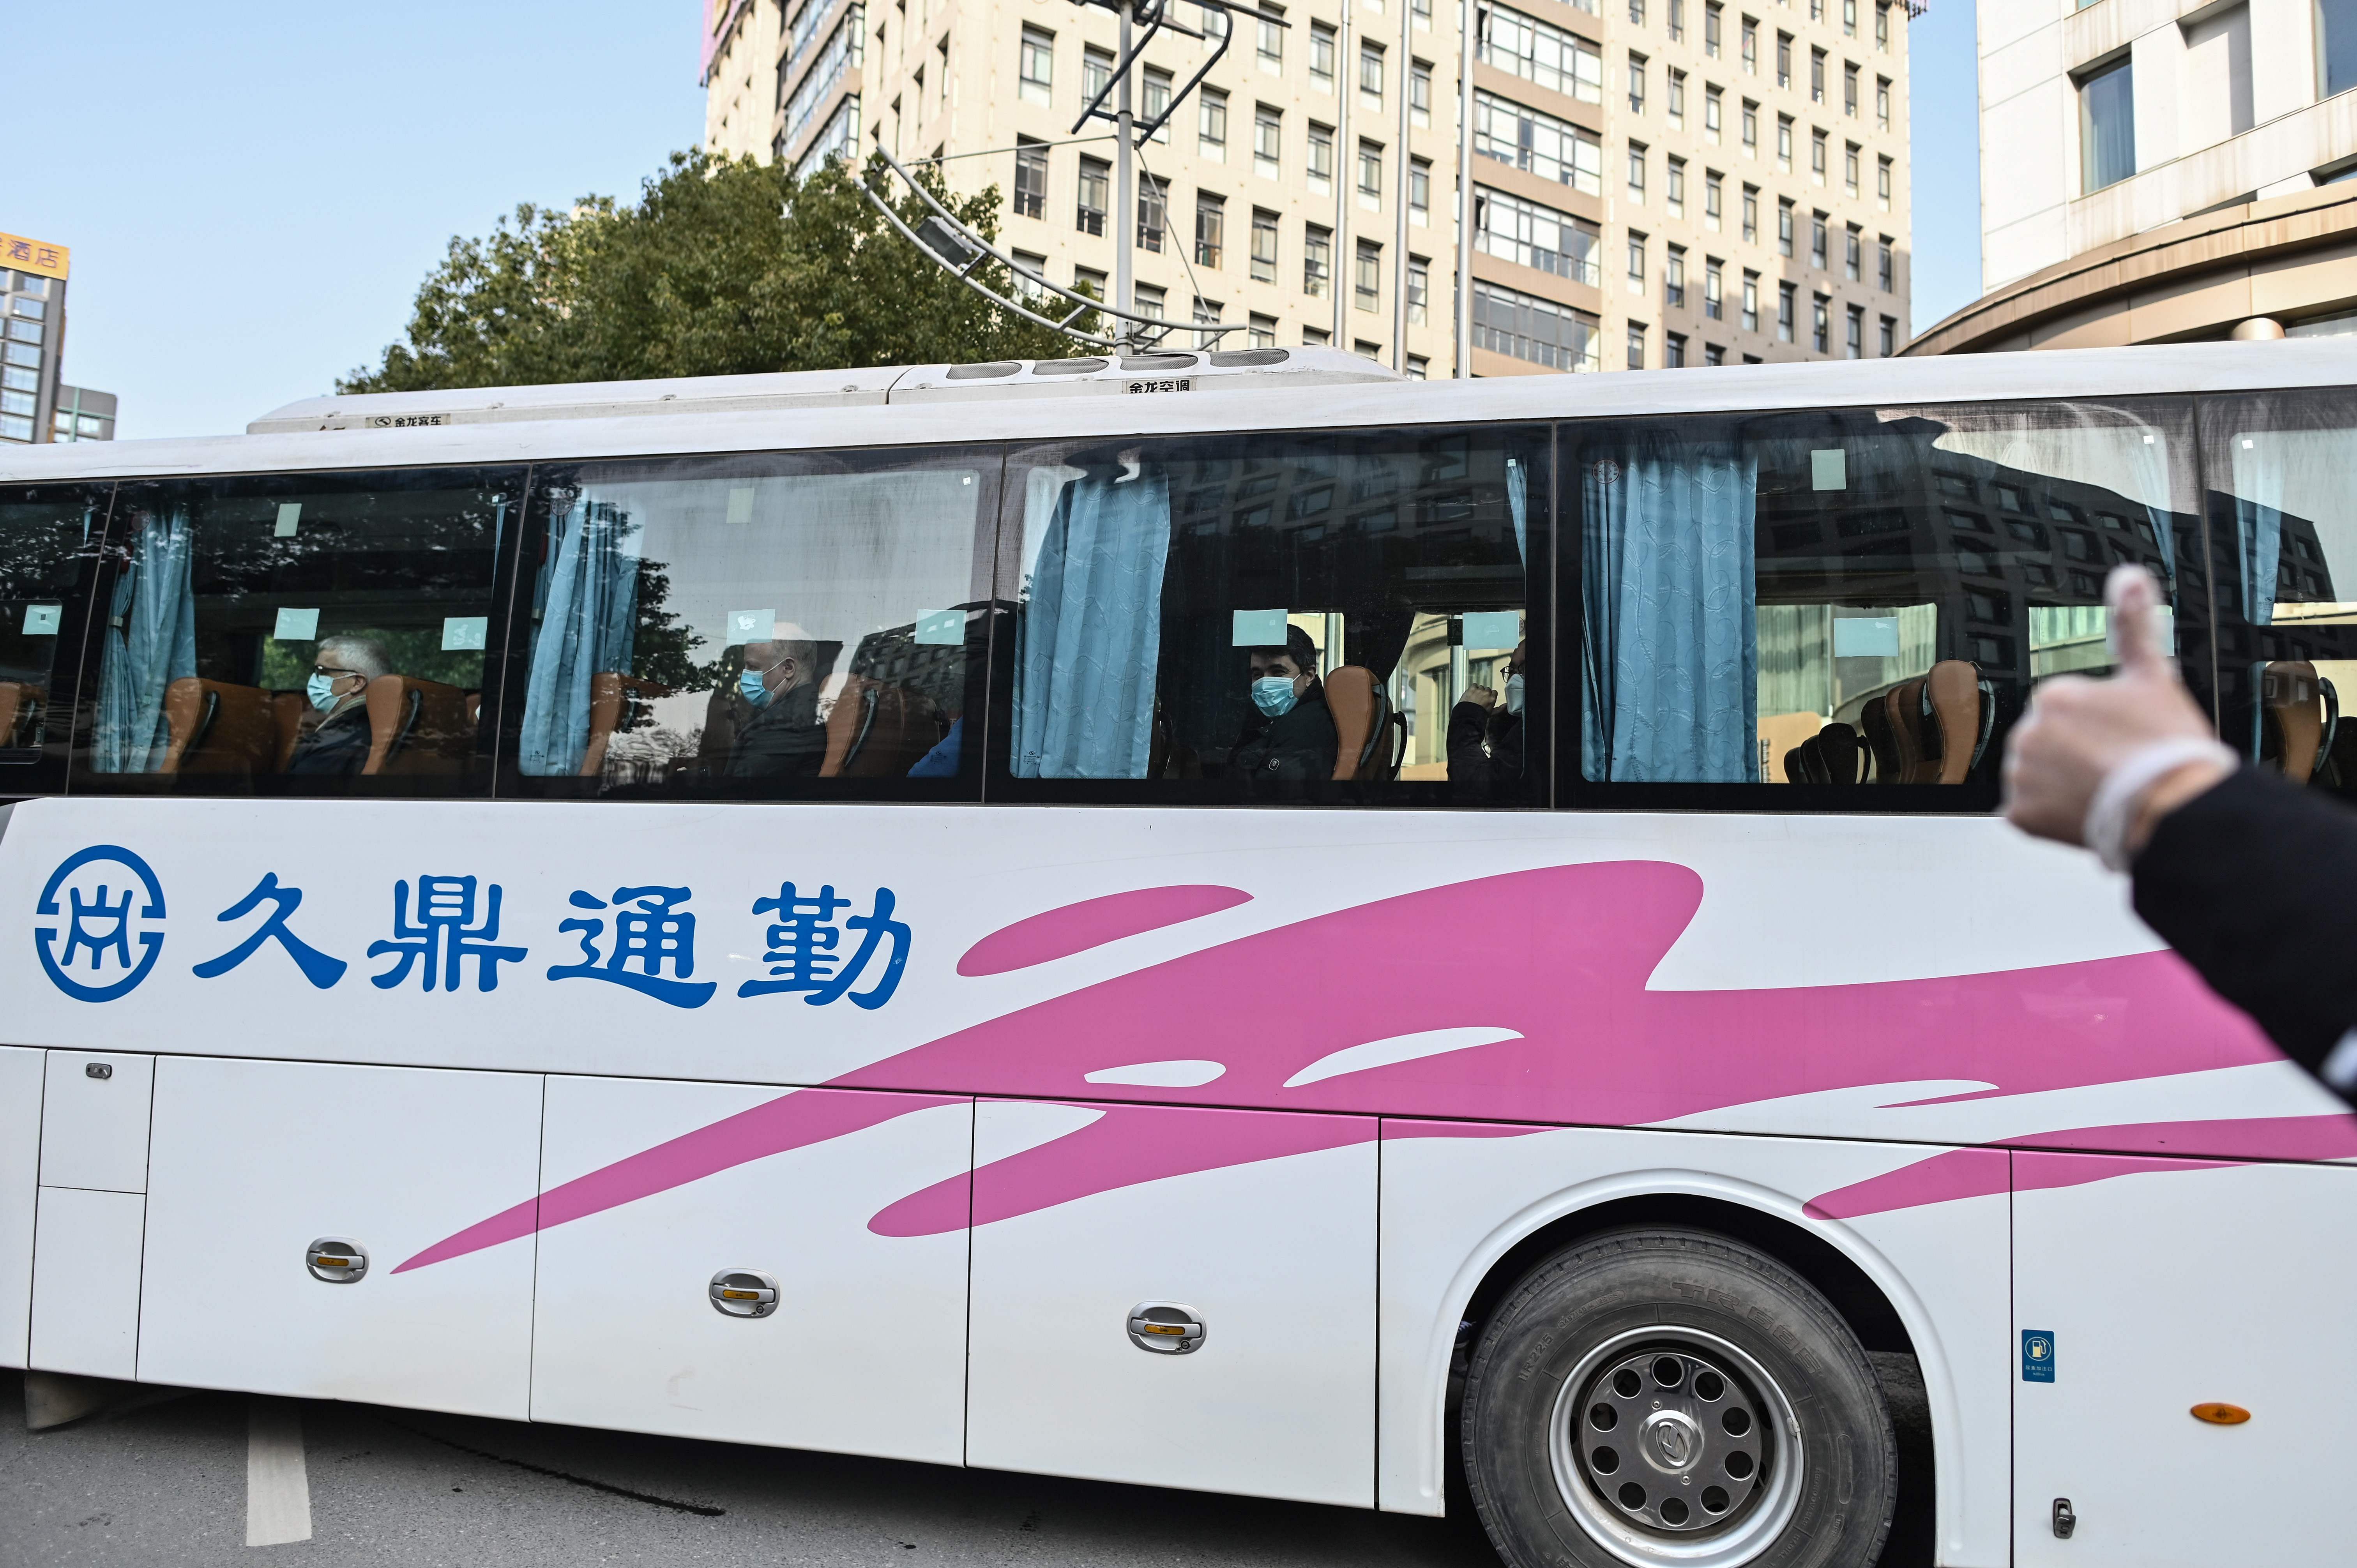 Members of the World Health Organization (WHO) team investigating the origins of the Covid-19 coronavirus pandemic leave The Jade Hotel on a bus after completing their quarantine in Wuhan. Credit: AFP Photo